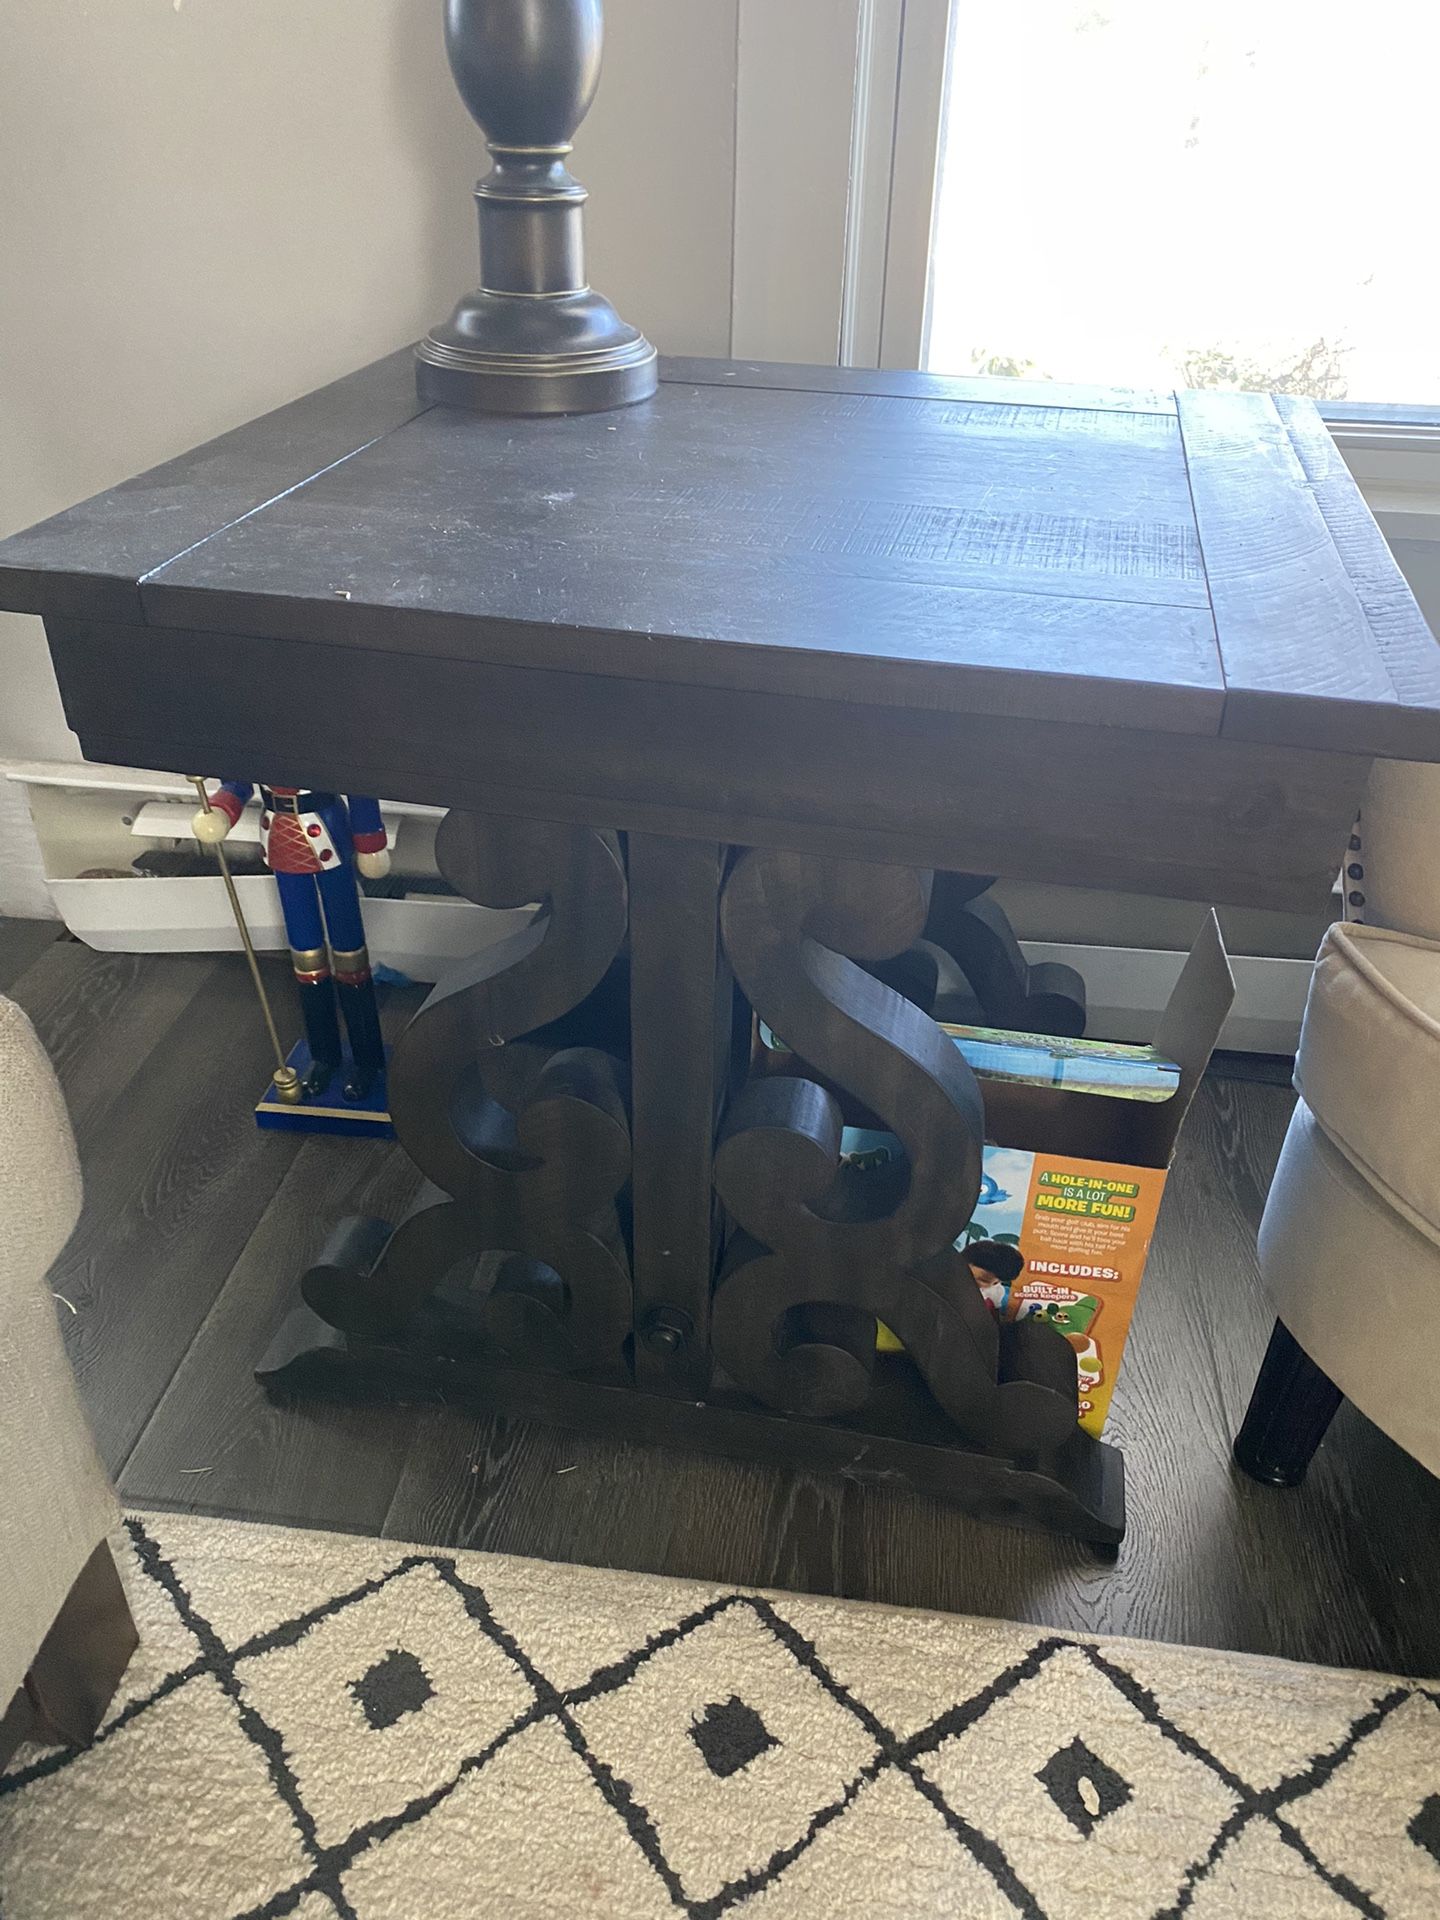 Charthouse End Table